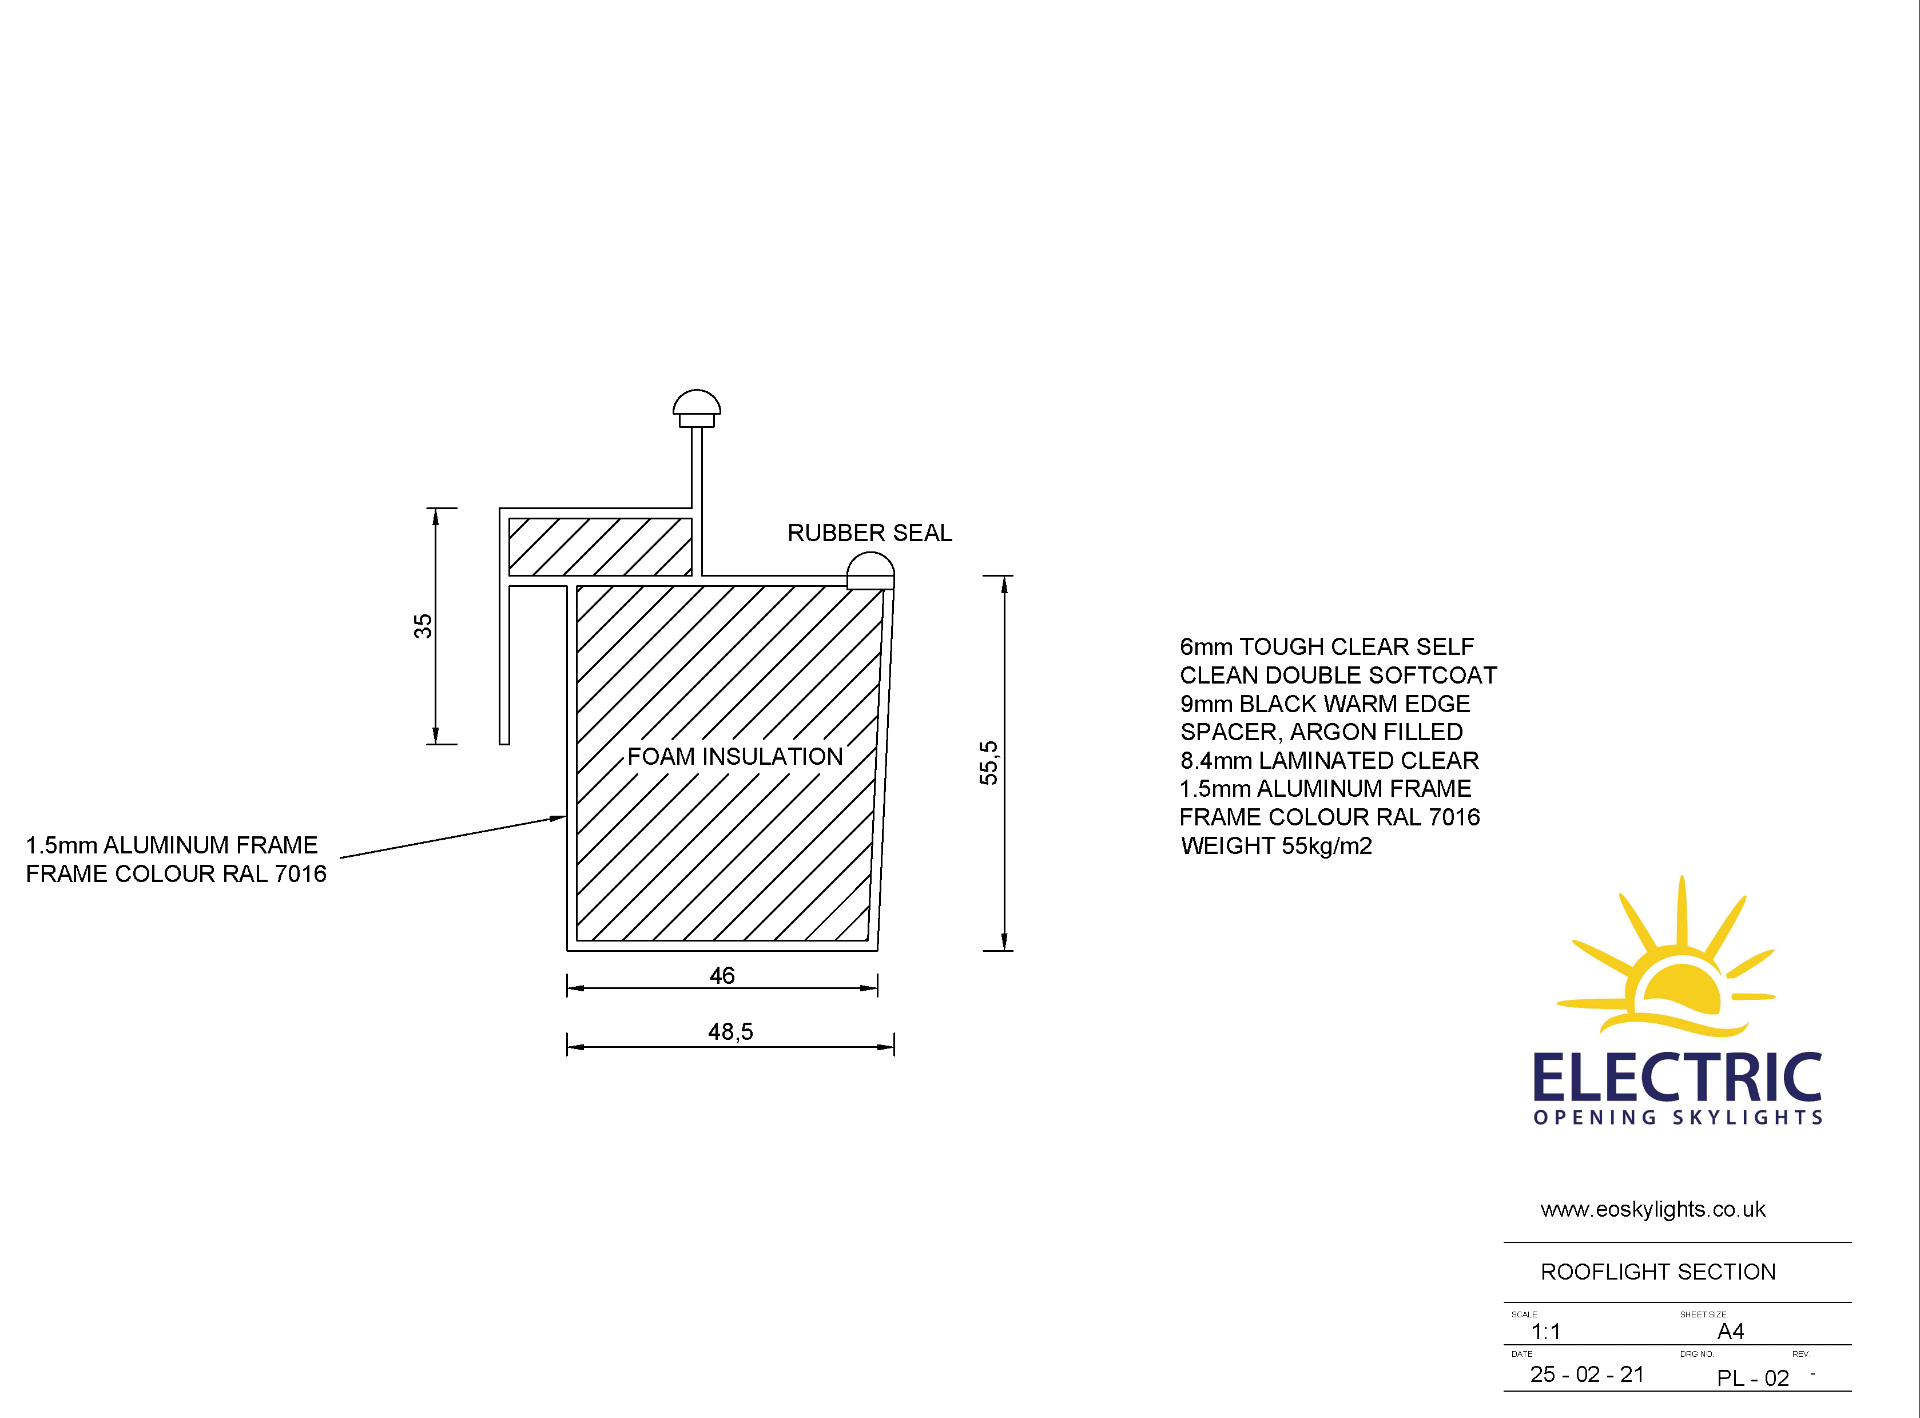 Panoroof (EOS)Electric Opening Skylight 1000x2000mm - Aluminiun Frame Double Glazed Laminated Self- - Image 5 of 6